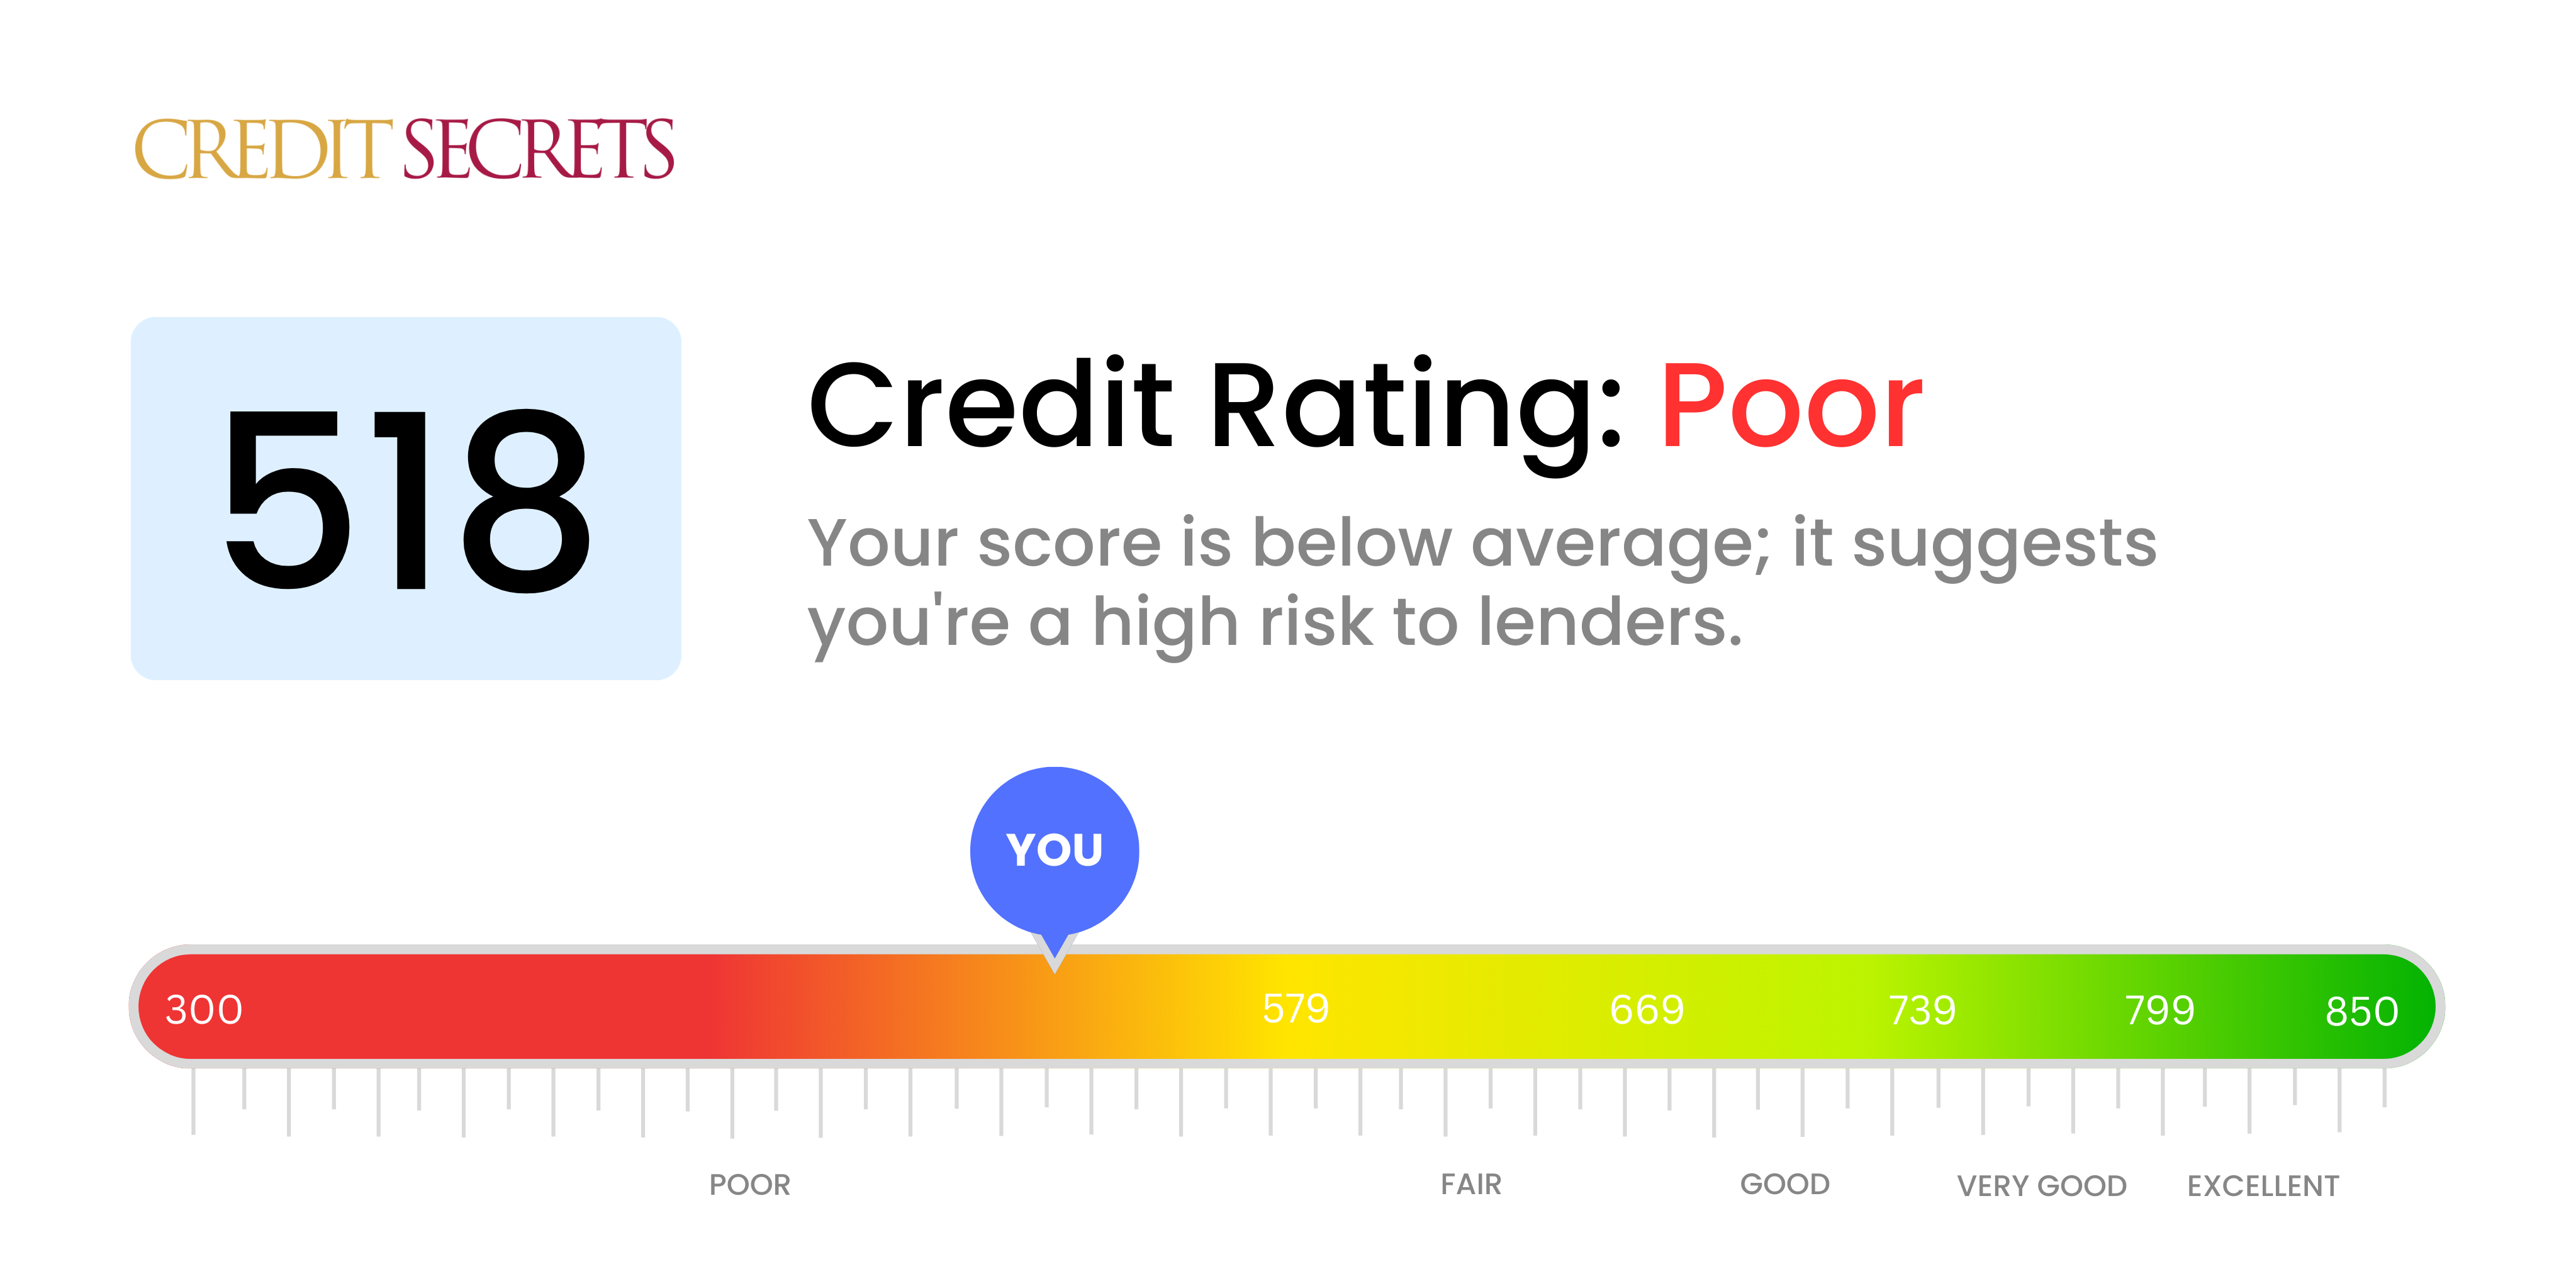 Is 518 a good credit score?